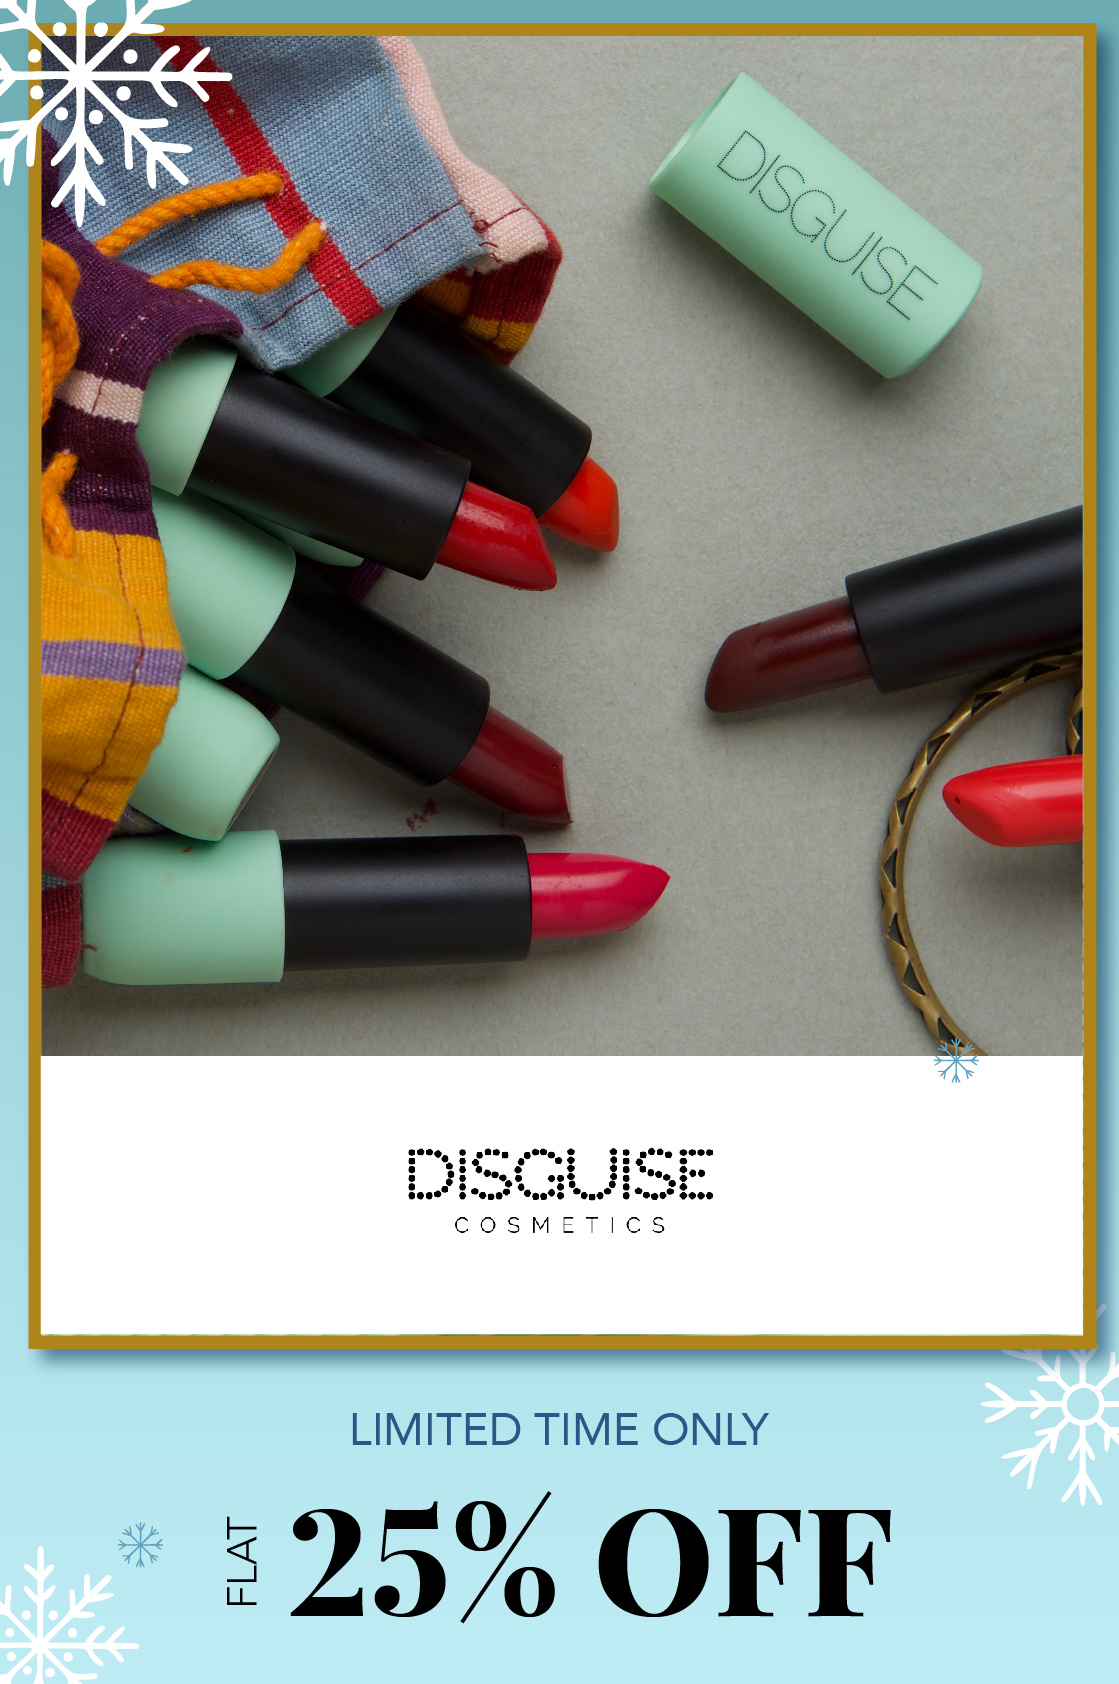 Shop our range of Vegan and Cruelty-Free Makeup products from Disguise Cosmetics on SublimeLife.in.